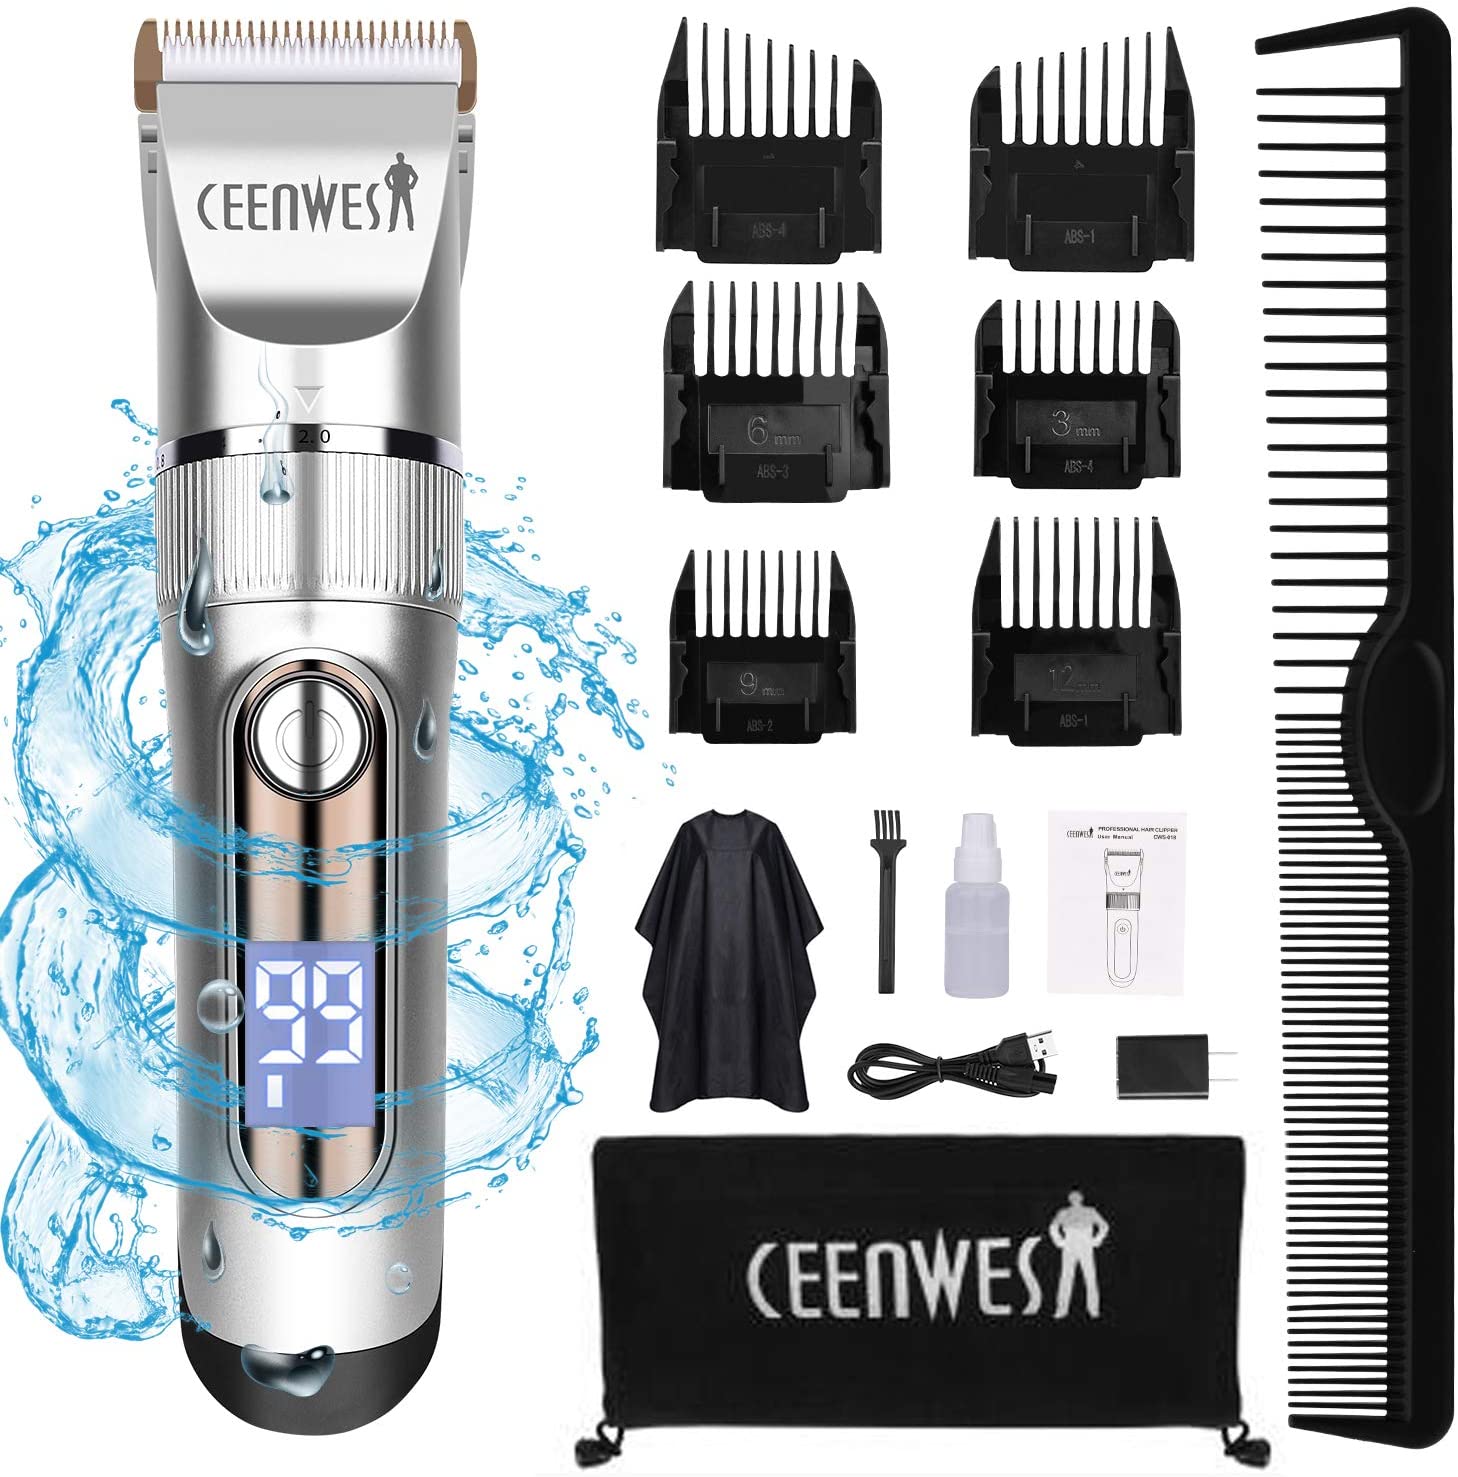 Ceenwes Professional Hair Clippers Cordless Hair trimmer Low Noise Hair Cutting Kit Beard Trimmer IPX7 Waterproof Body Hair Removal Machine with LED Display Hairdressing Cape and Travel Bag - Home Decor Gifts and More